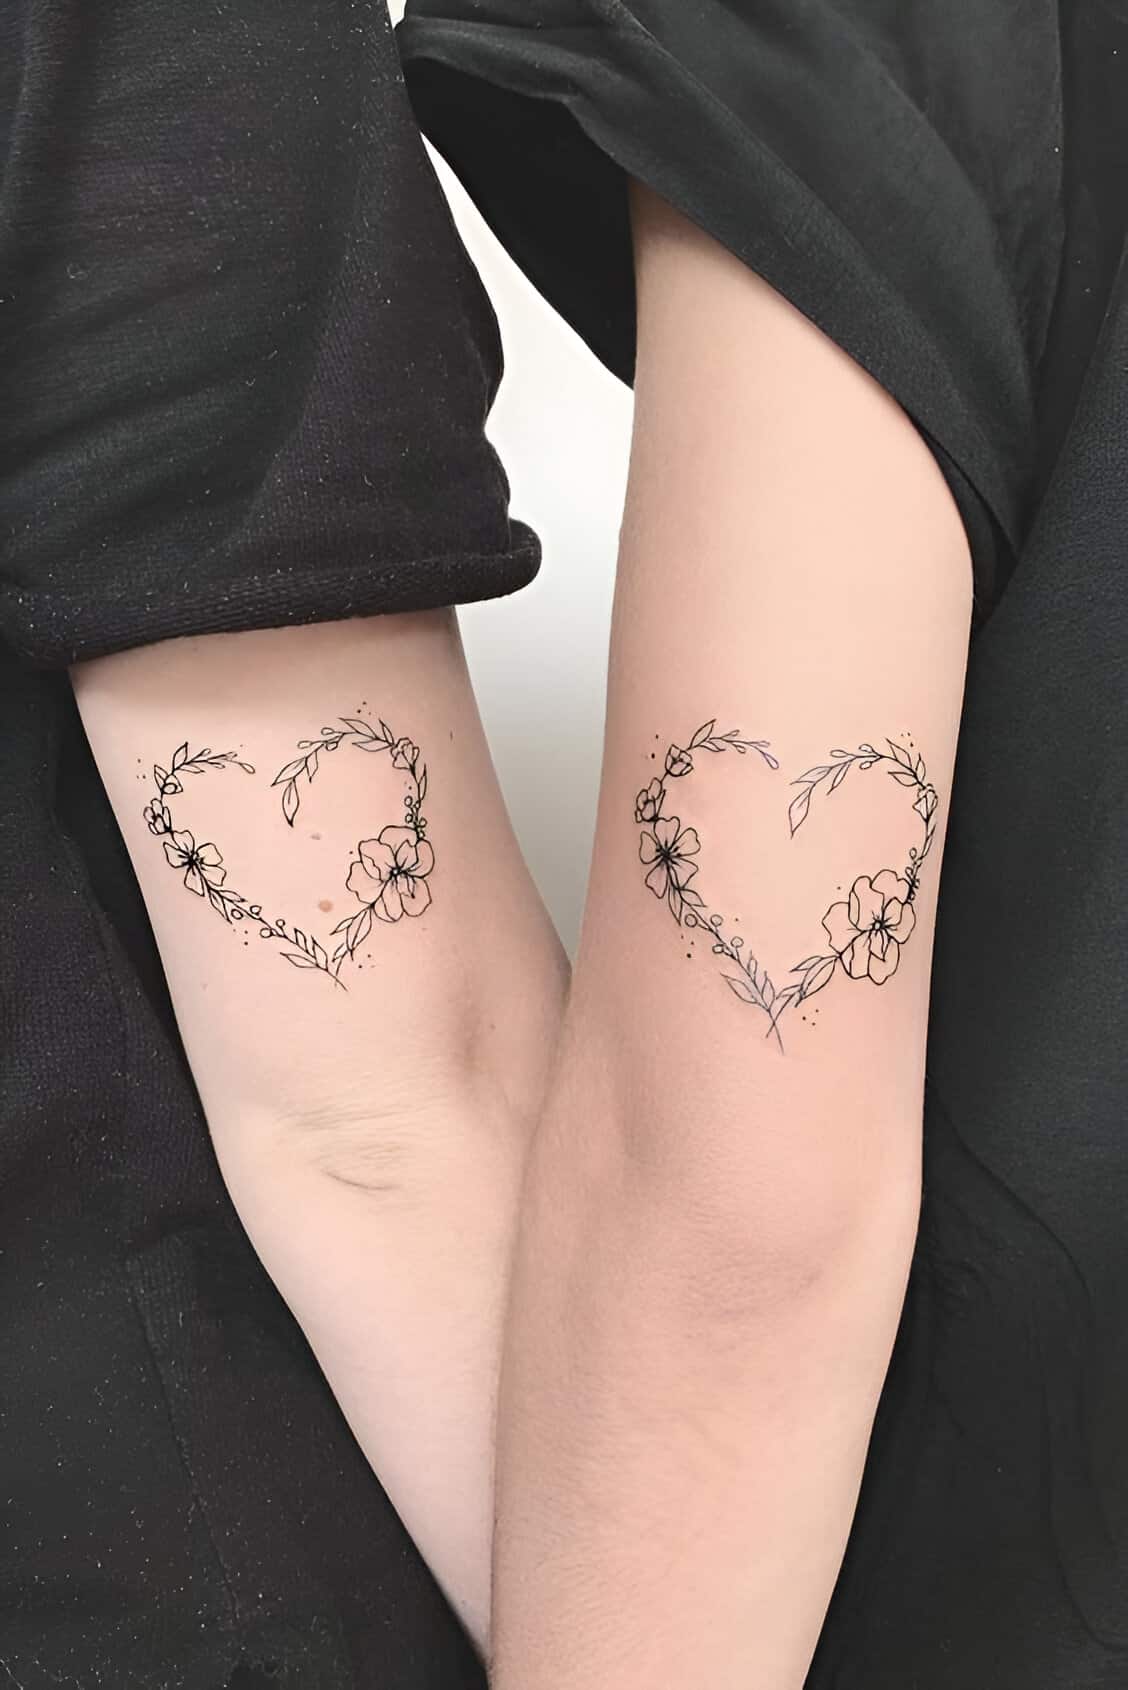 30 Elegant Matching Heart Tattoos To Get With Your Partner ASAP 23